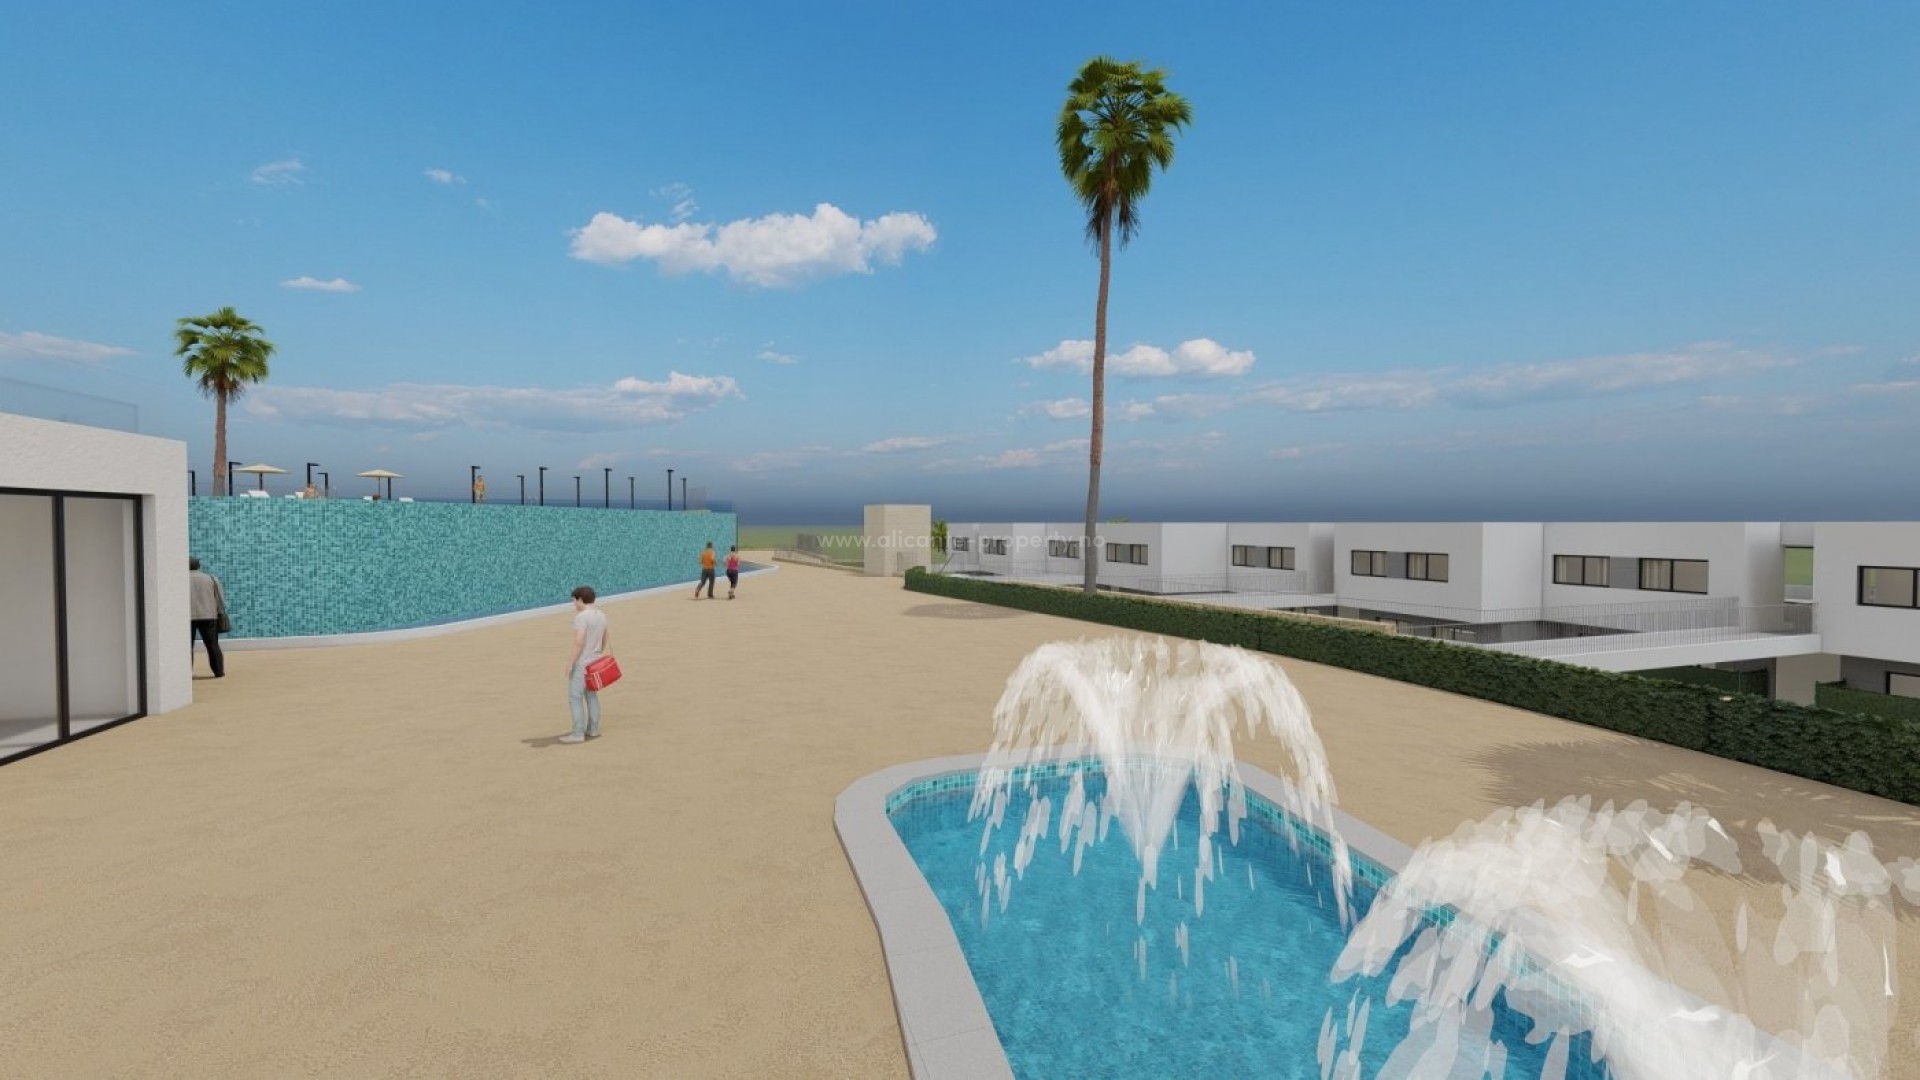 Luxury apartments with sea views in Finestrat, 2 bedrooms, 2 bathrooms, terrace with incredible views, common areas with infinity pool, gym, parking